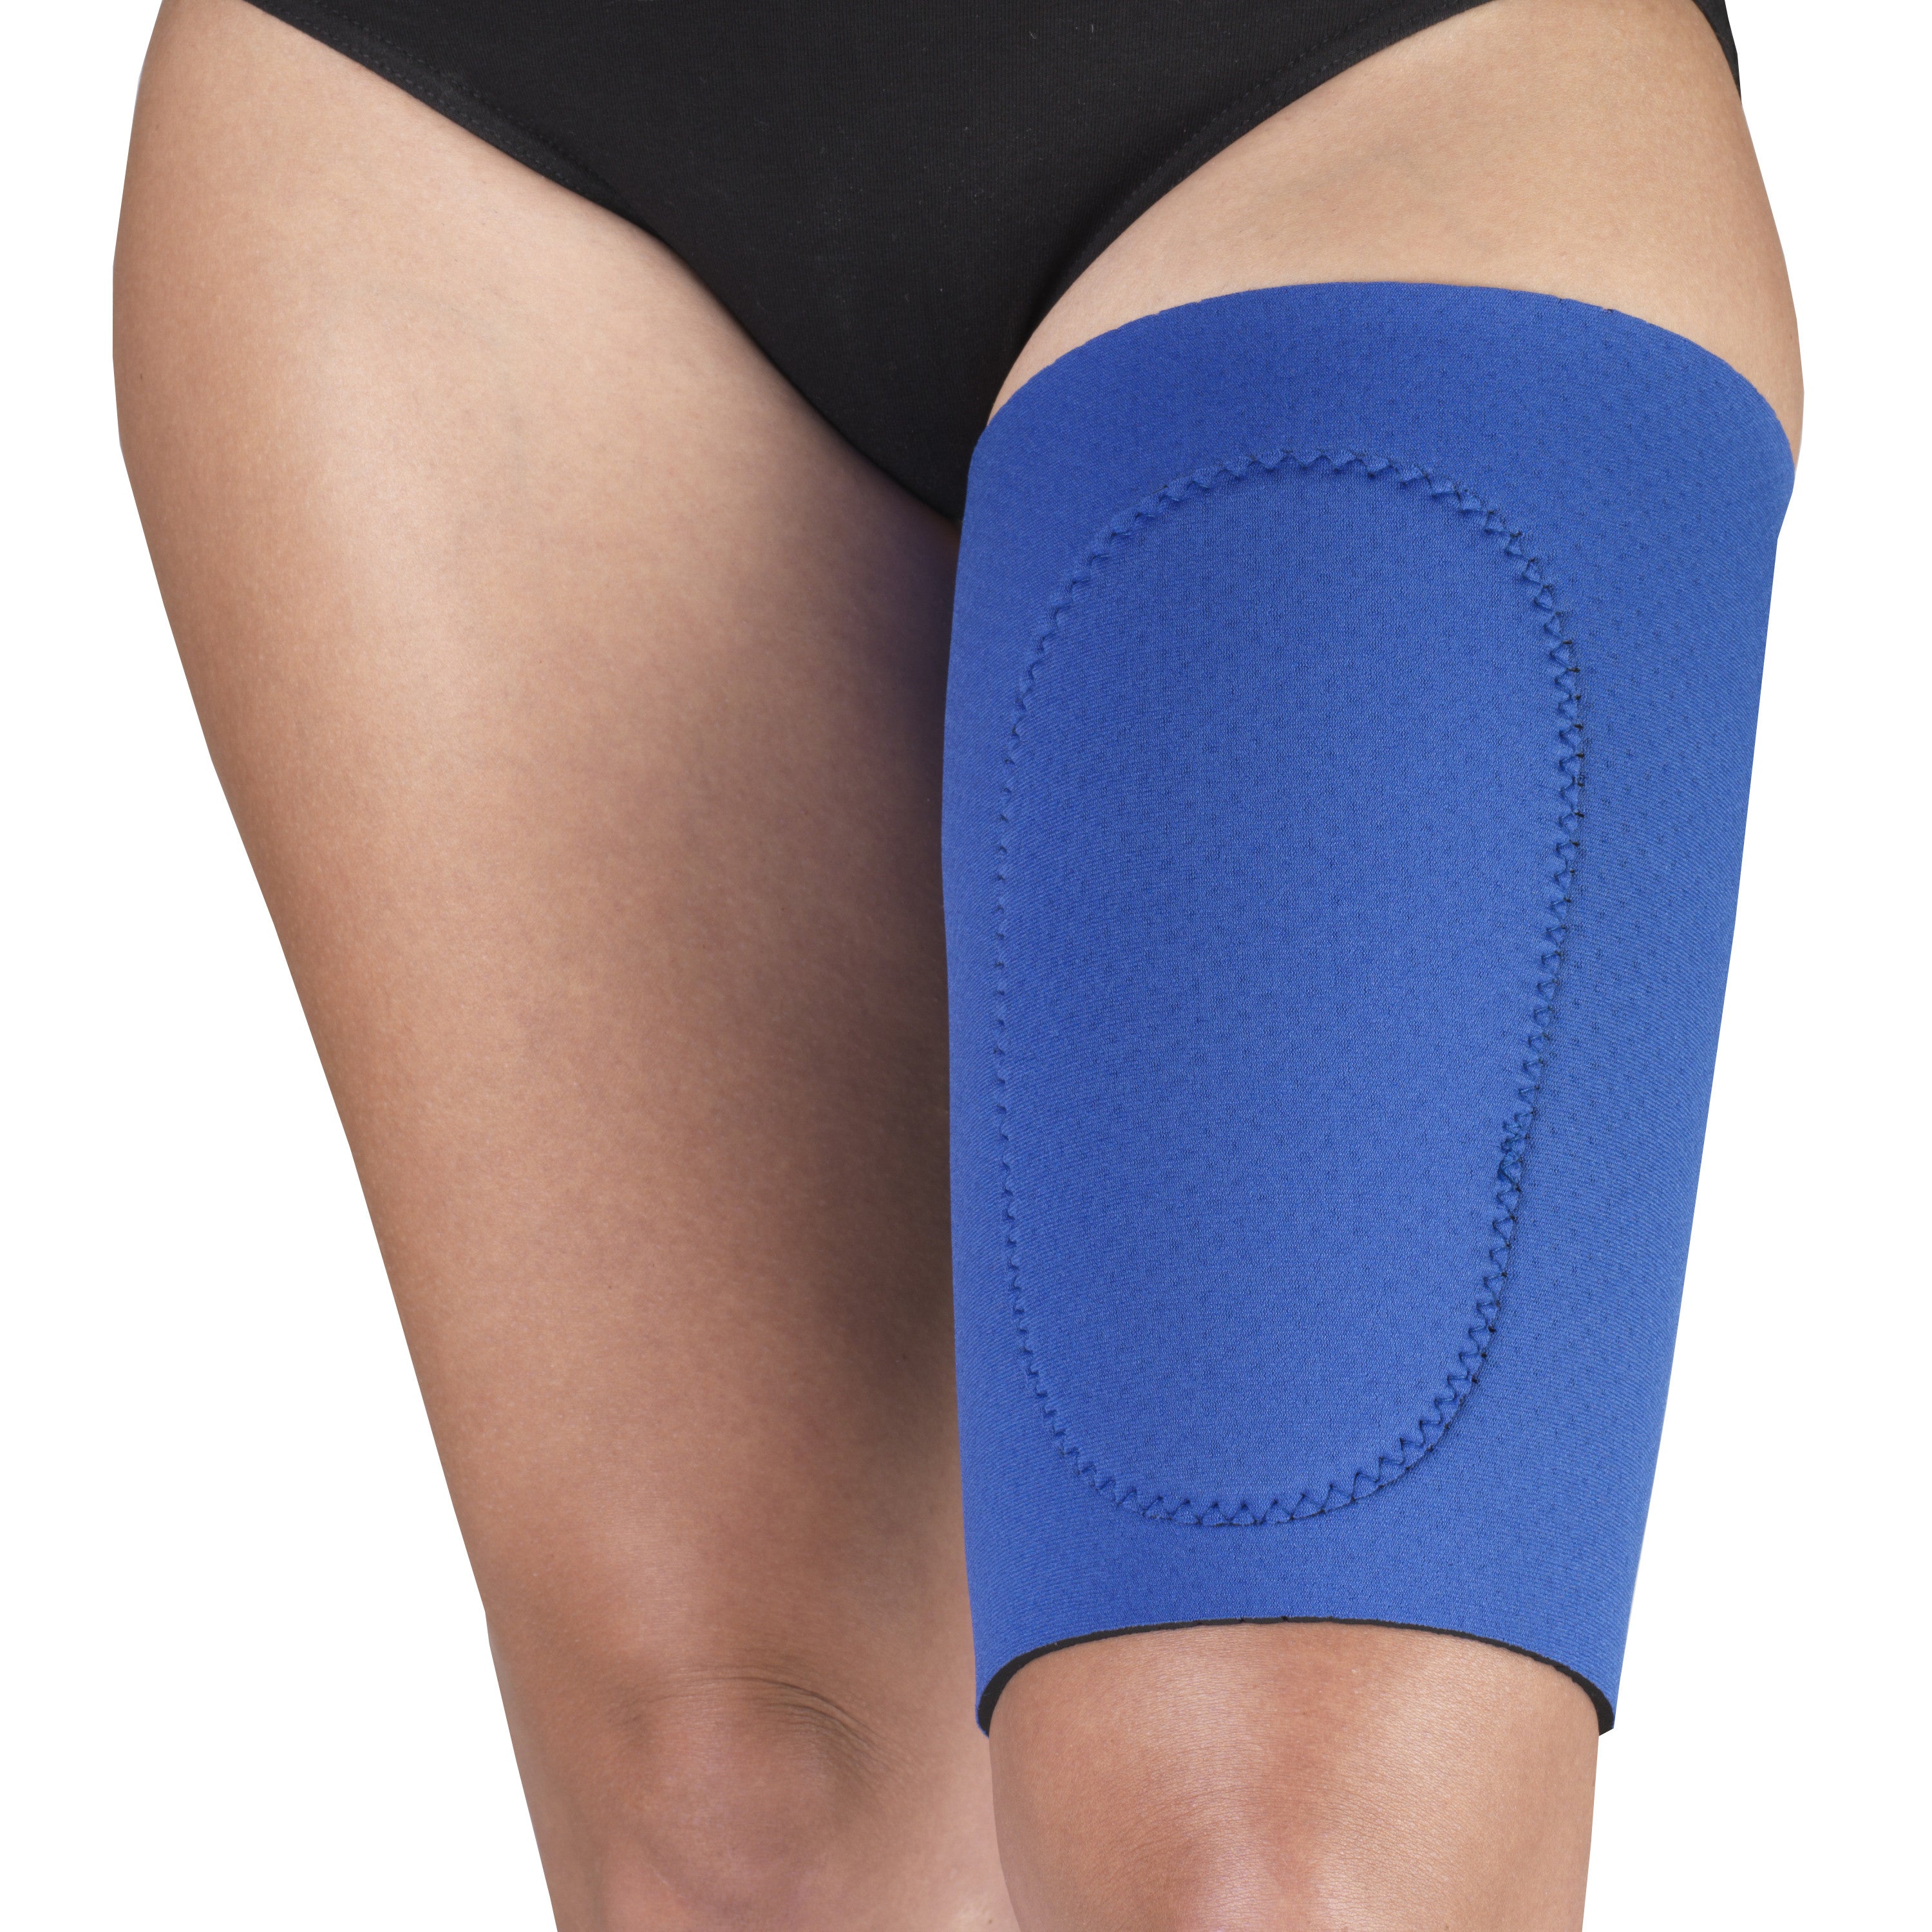 United Medicare Thigh Brace with Pelvic Support Right (C-02